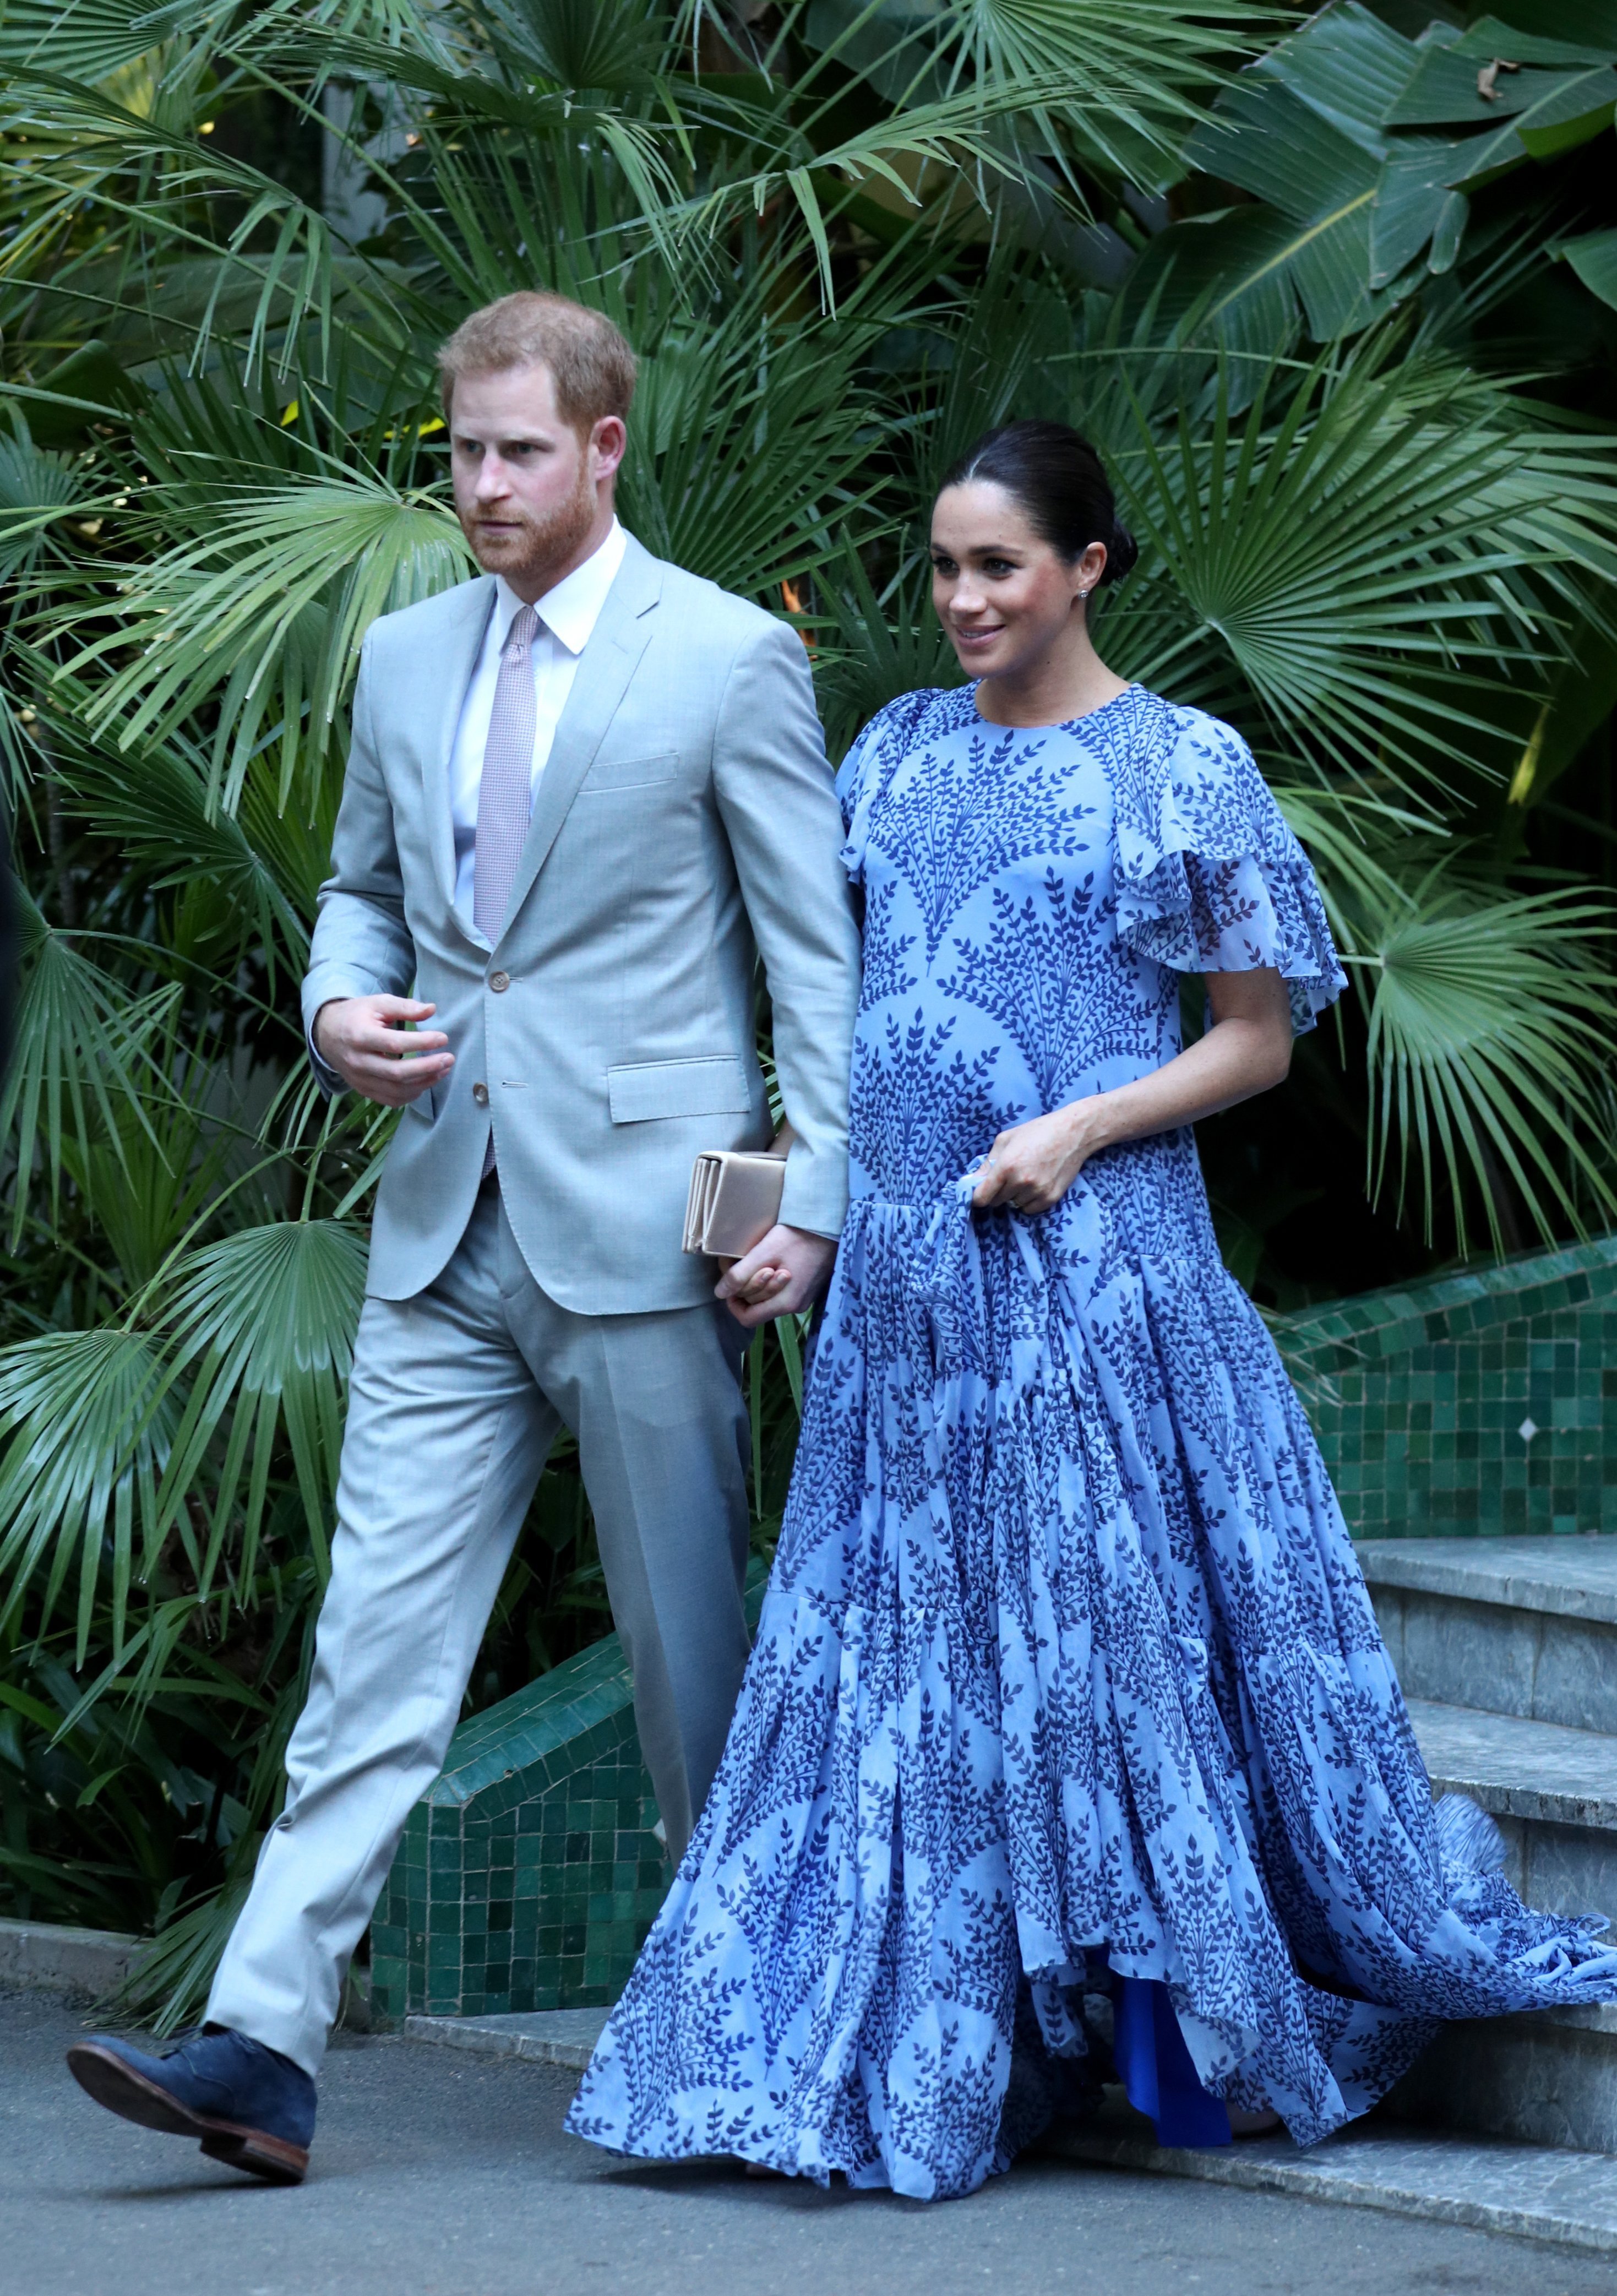 Meghan Markle and Prince Harry at the residence of King Mohammed VI of Morocco in February 2019  Photo: Getty Images